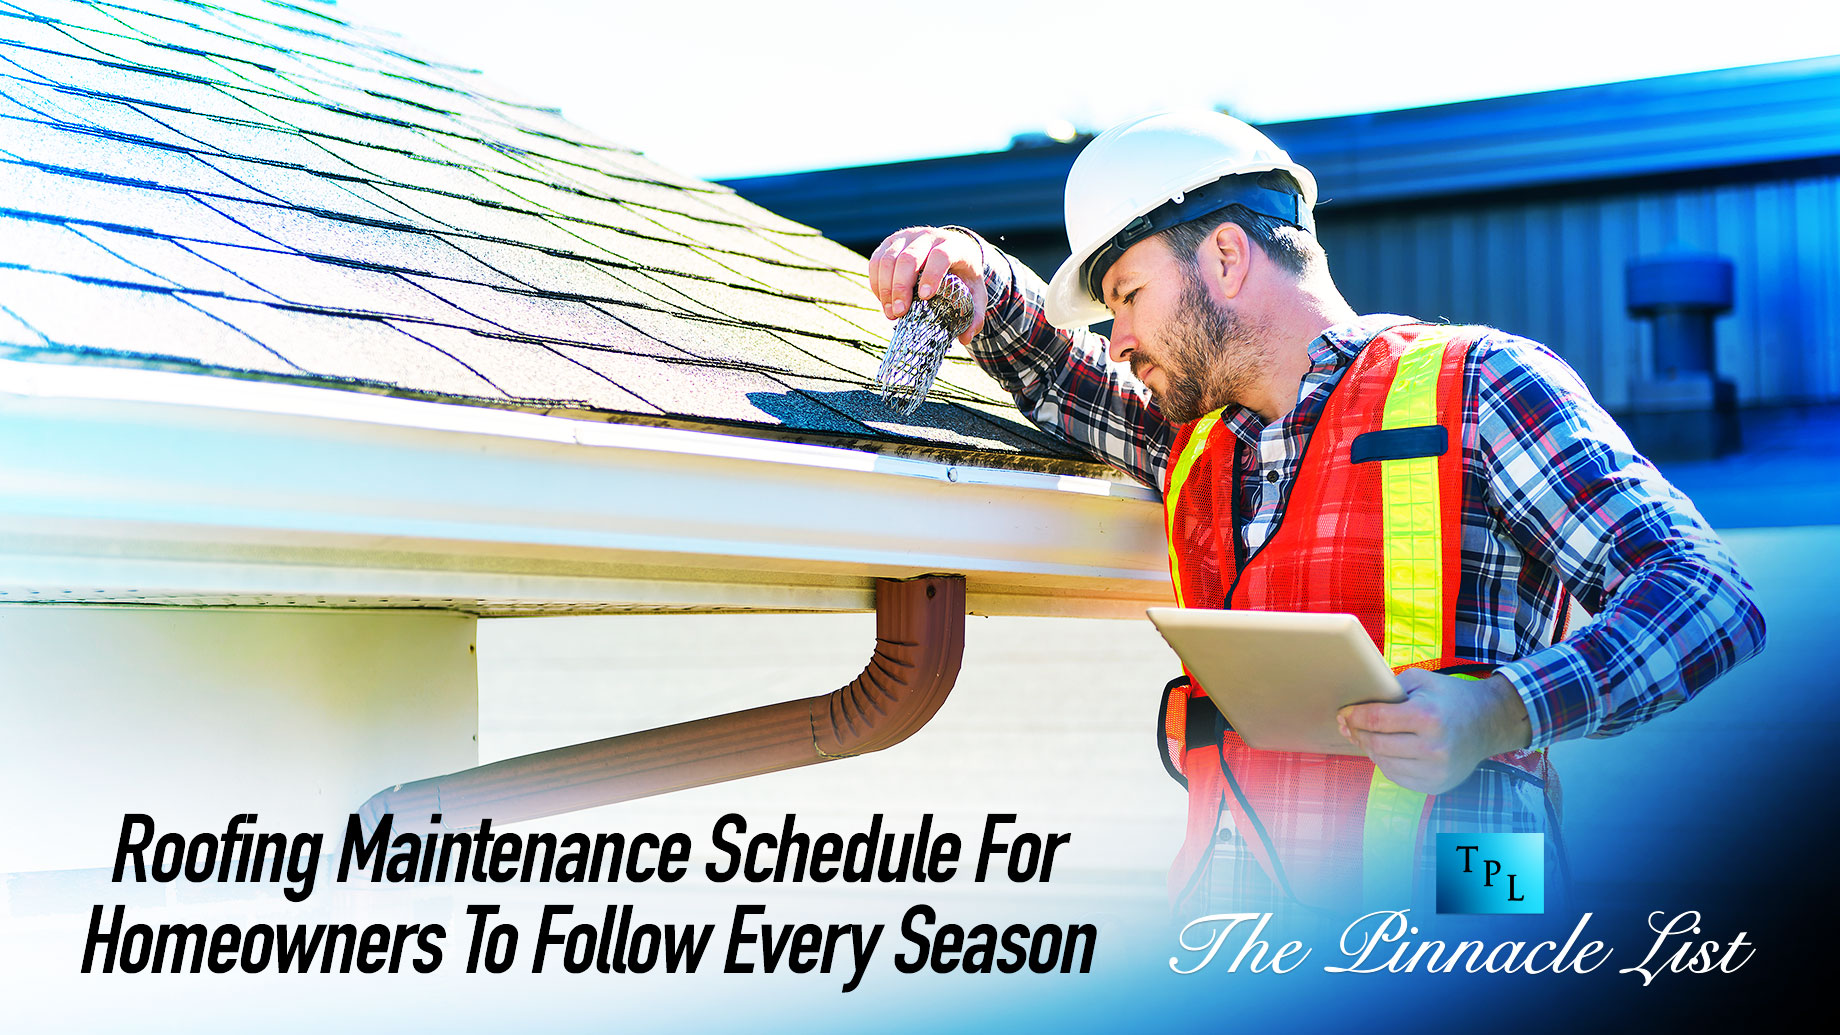 Roofing Maintenance Schedule For Homeowners To Follow Every Season